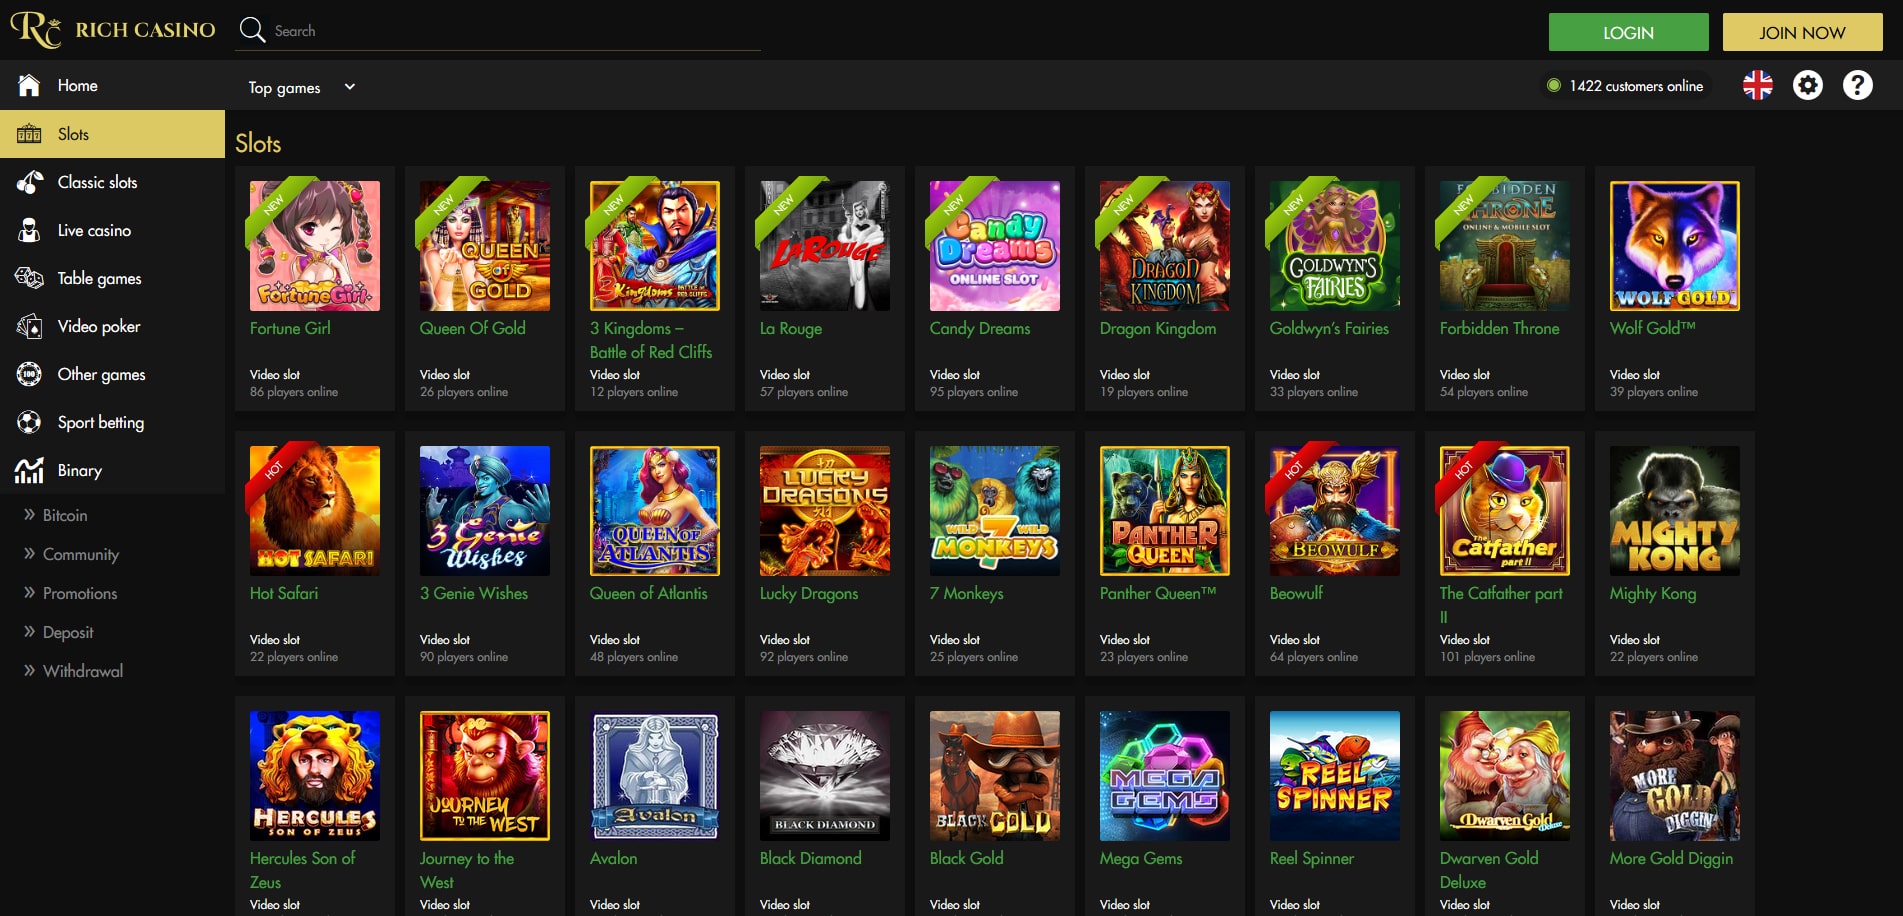 Rich Casino Gaming Selection